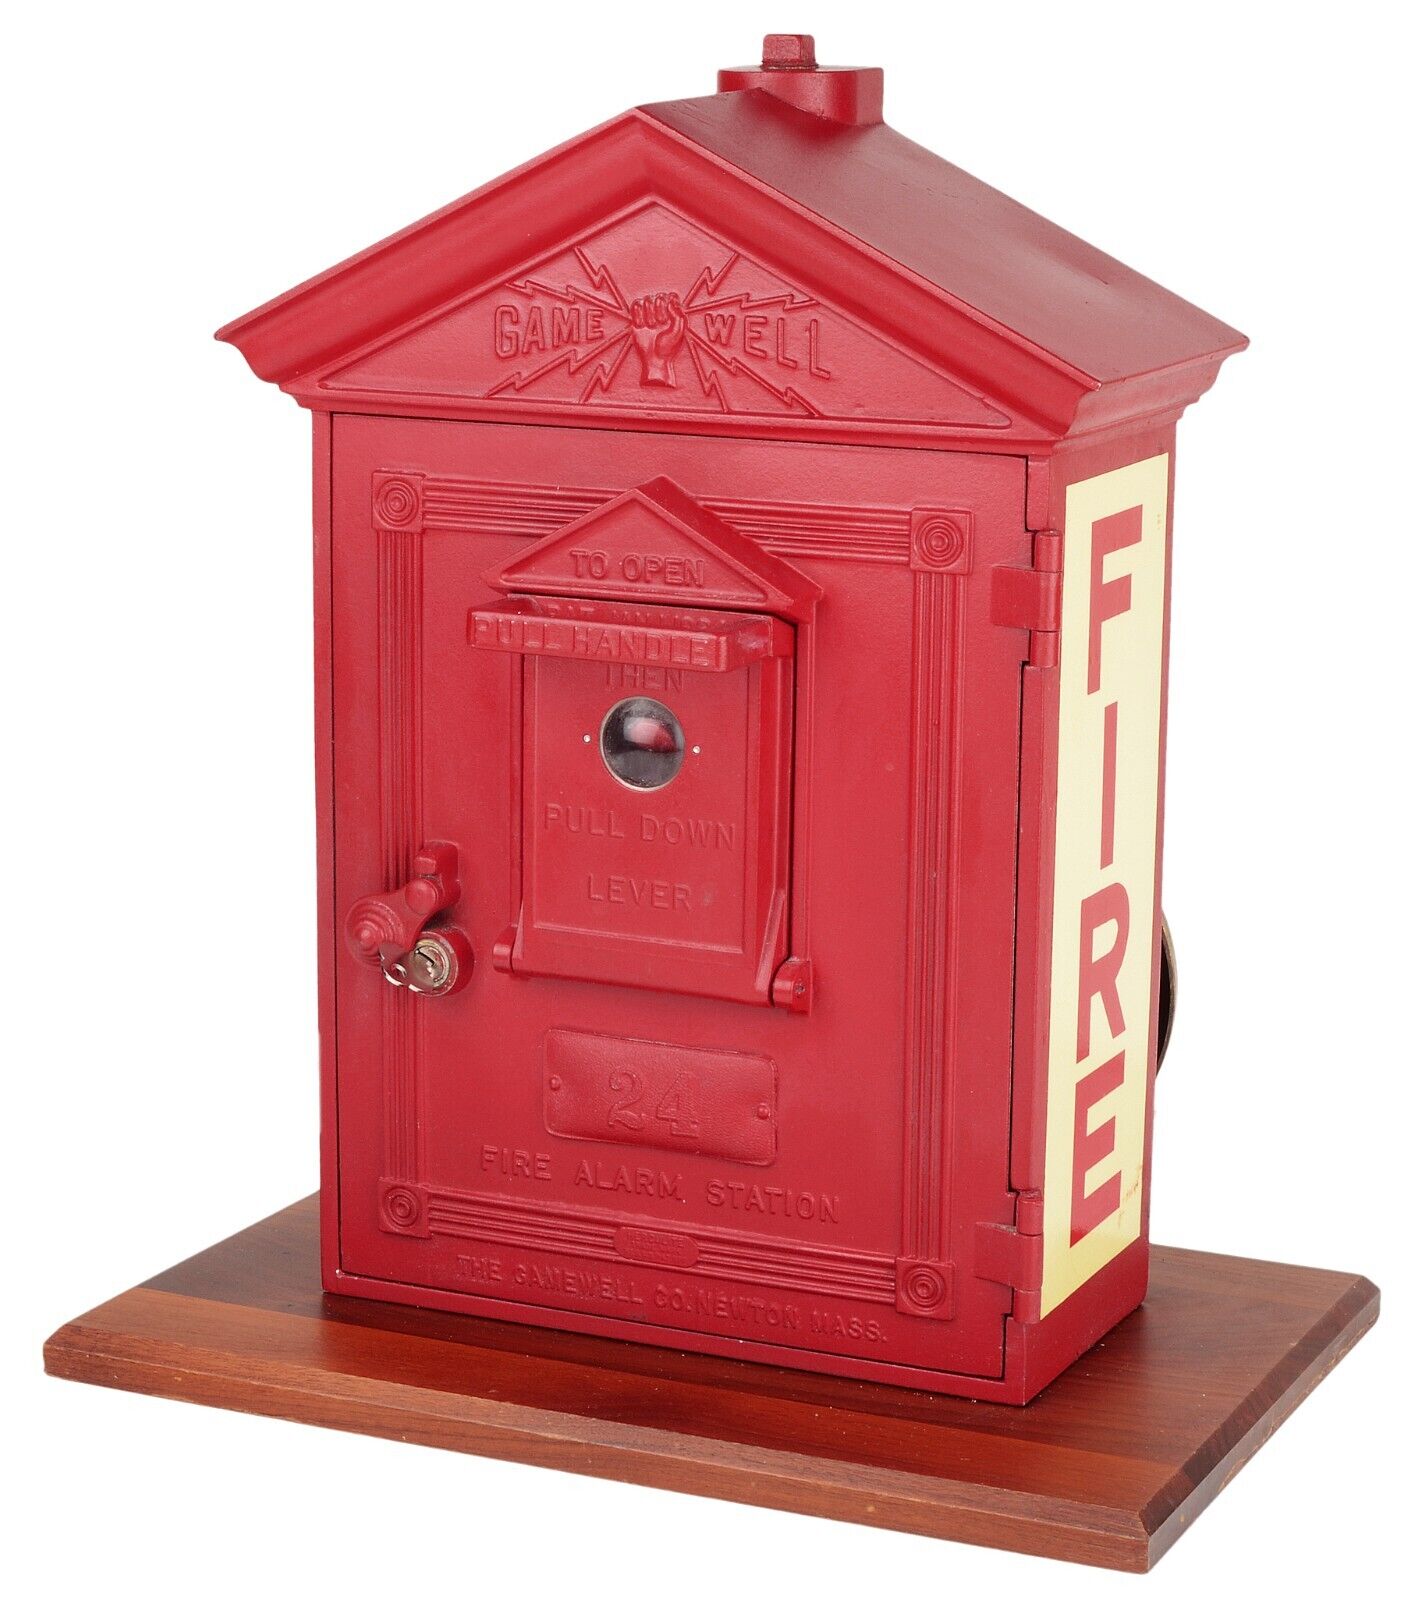 Gamewell Fire Alarm Station Box with US Army Signal Corps Bell